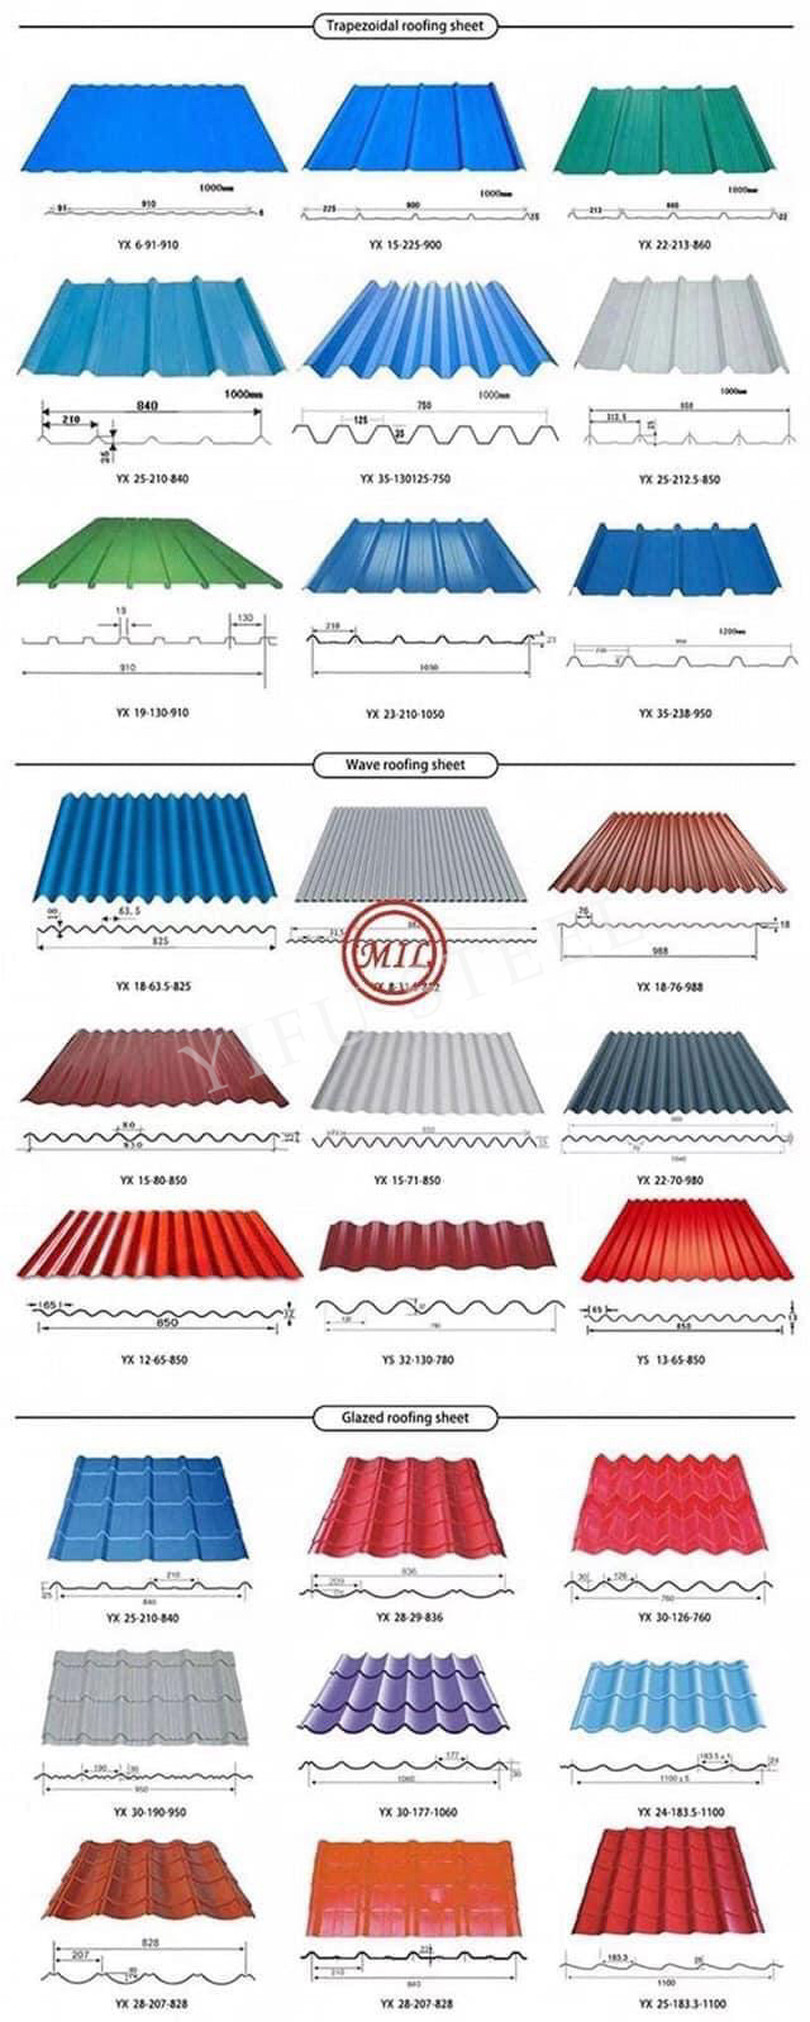 Factory-High-Quality-Galvanized-Colour-Coated-Corrugated-Sheet-Metal-Roofing-Sheet-details1